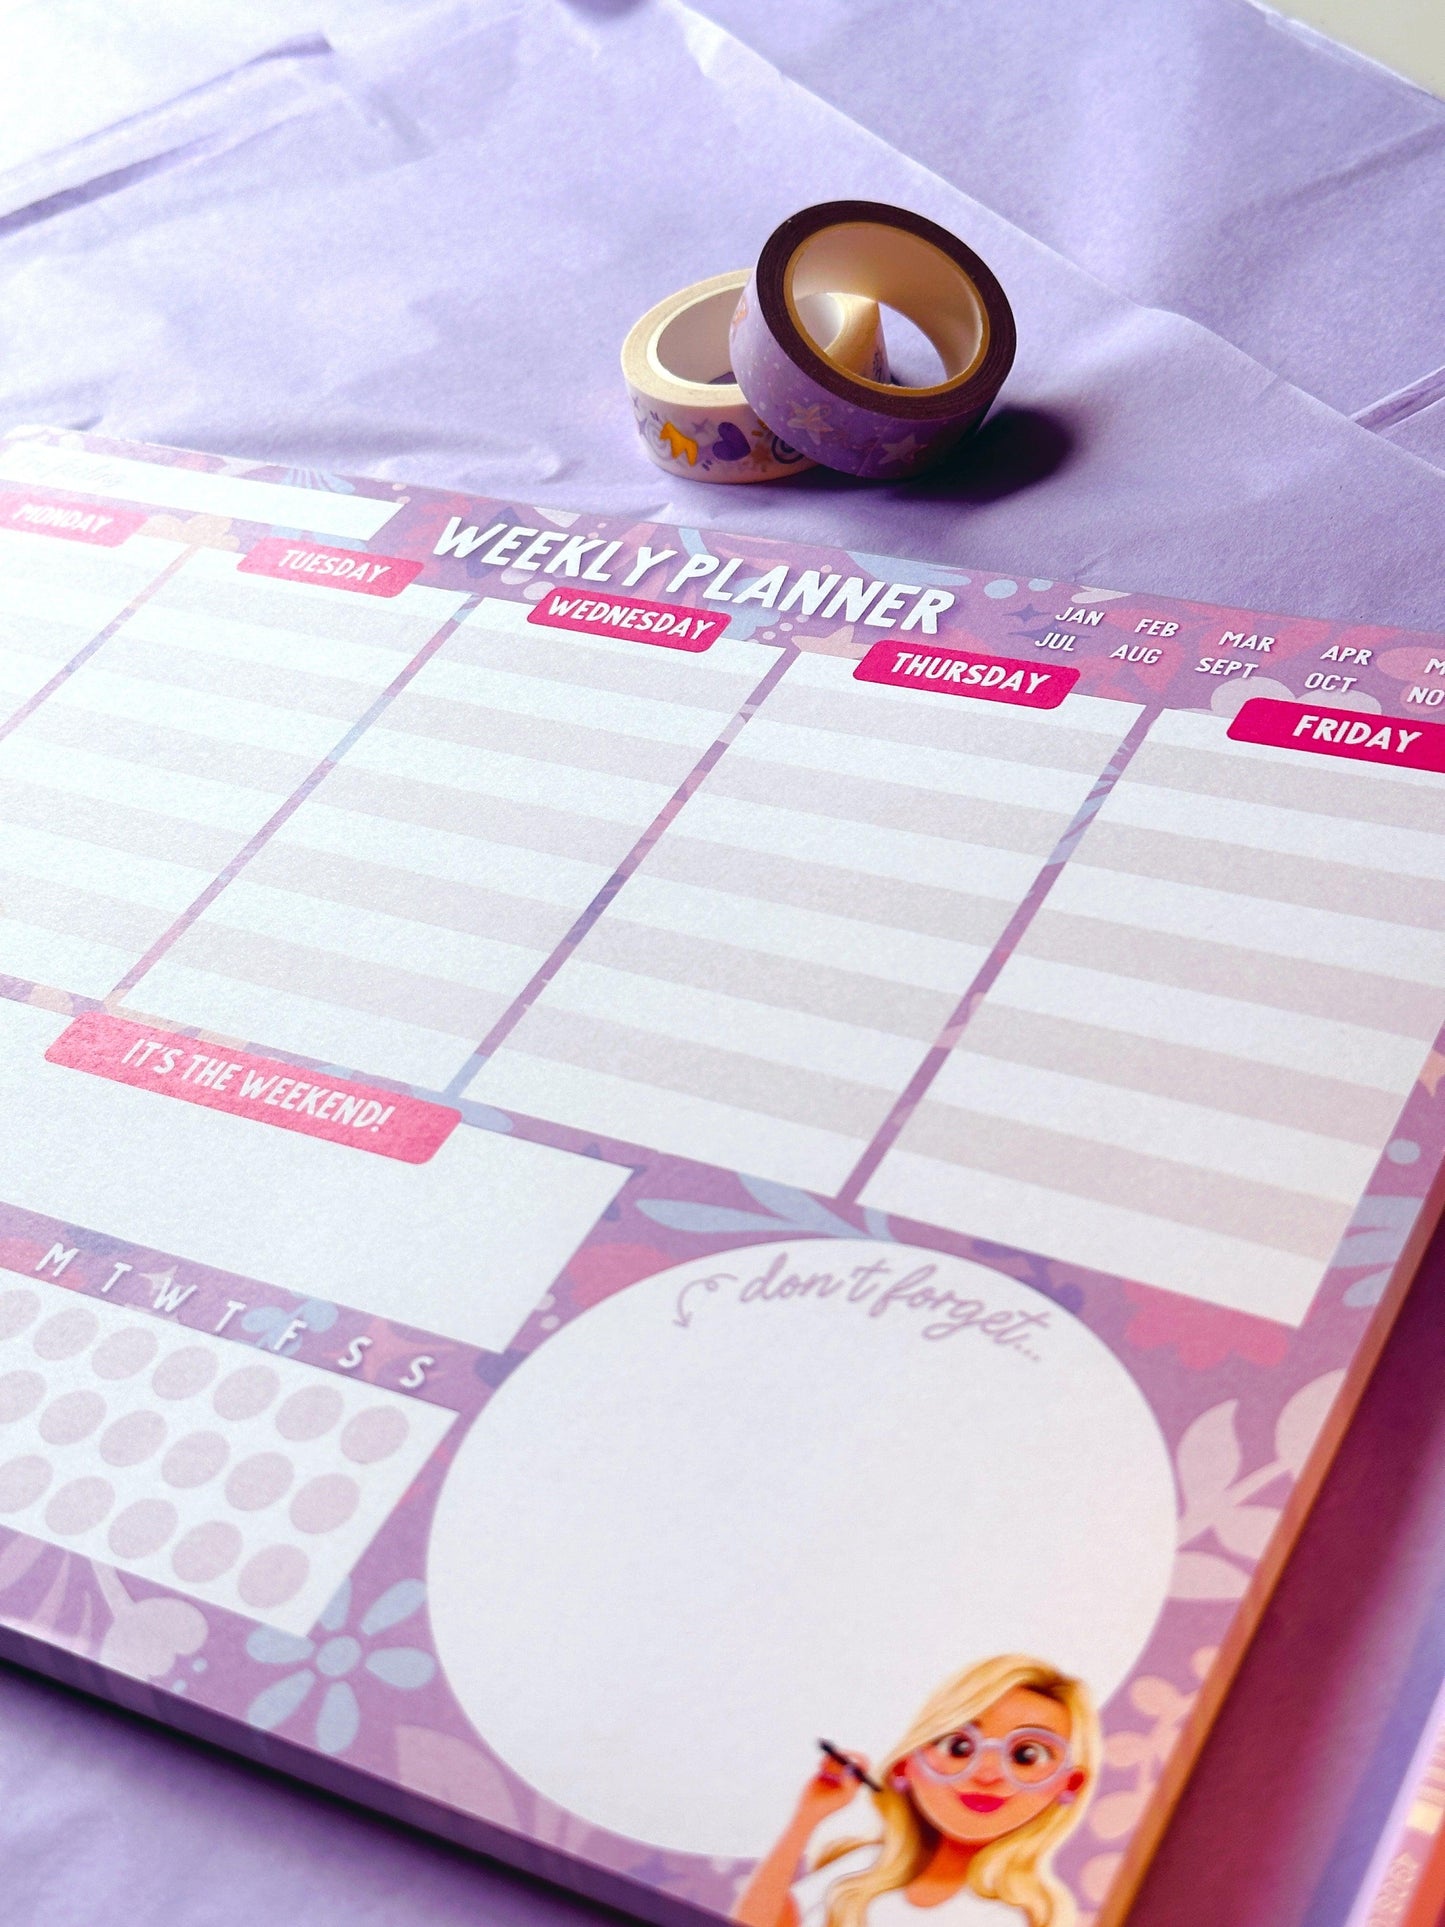 Weekly Planner A4 Lilac Notepad - Emily Harvey Art